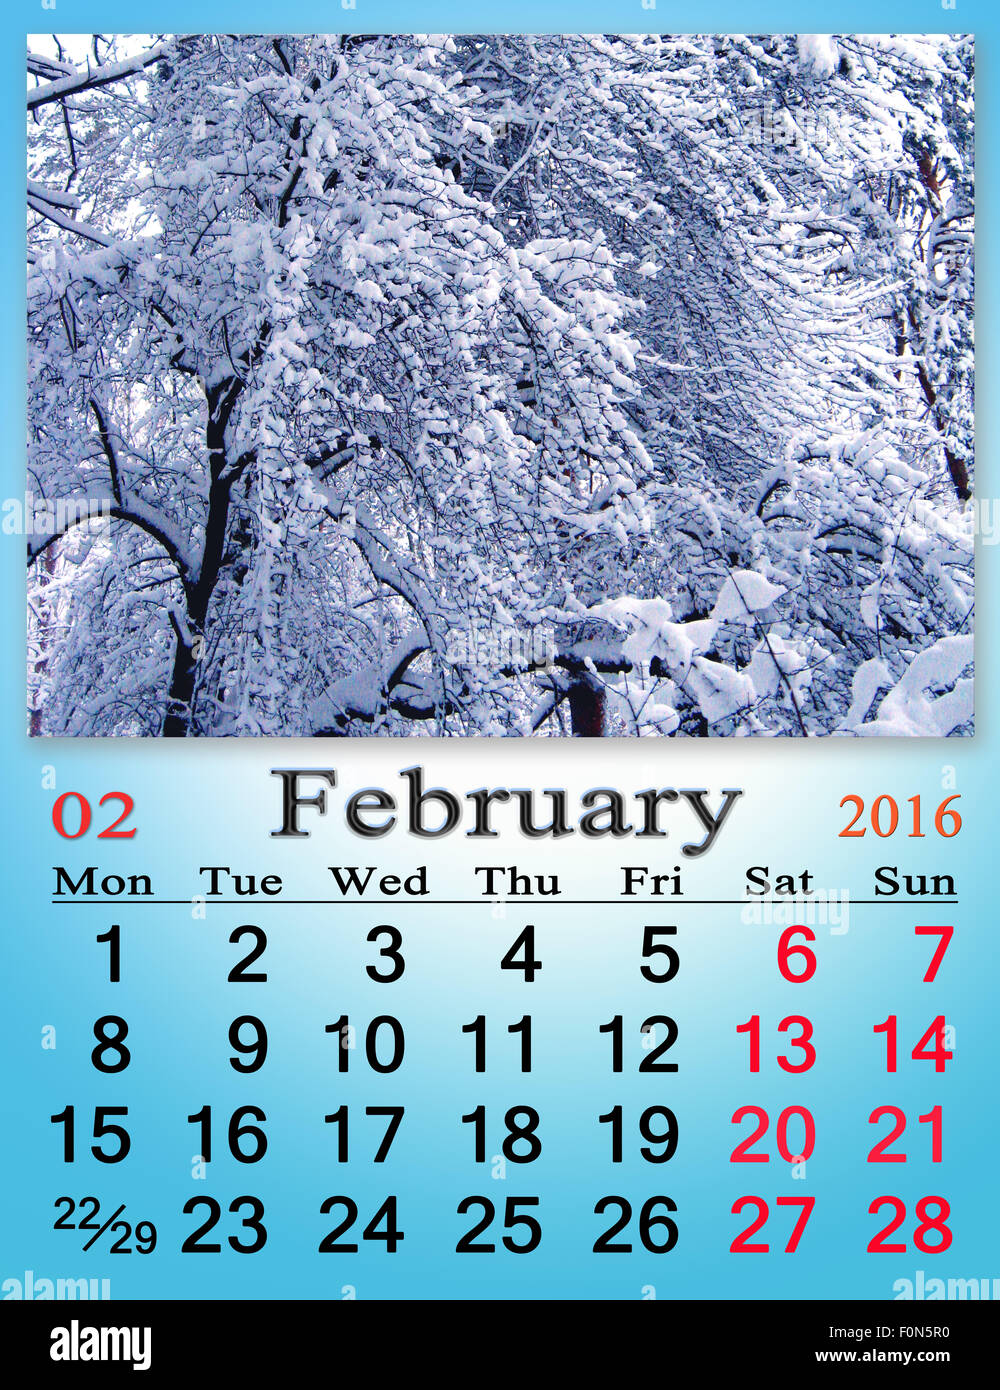 calendar for February 2016 with snowy branches of trees in the forest Stock Photo